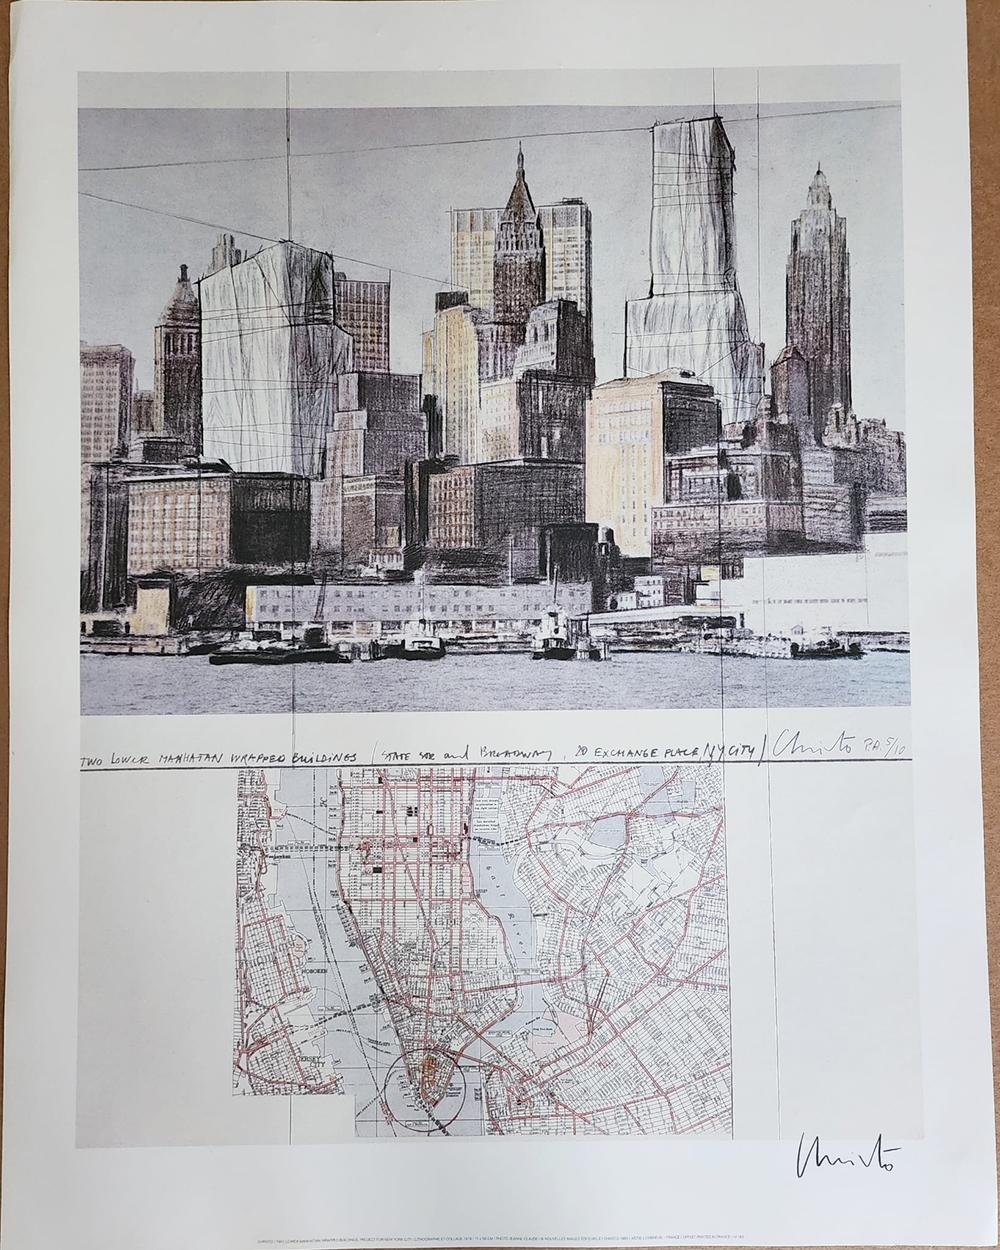 CHRISTO 'TWO LOWER MANHATTAN WRAPPED BUILDINGS - 1985' - Print by Christo